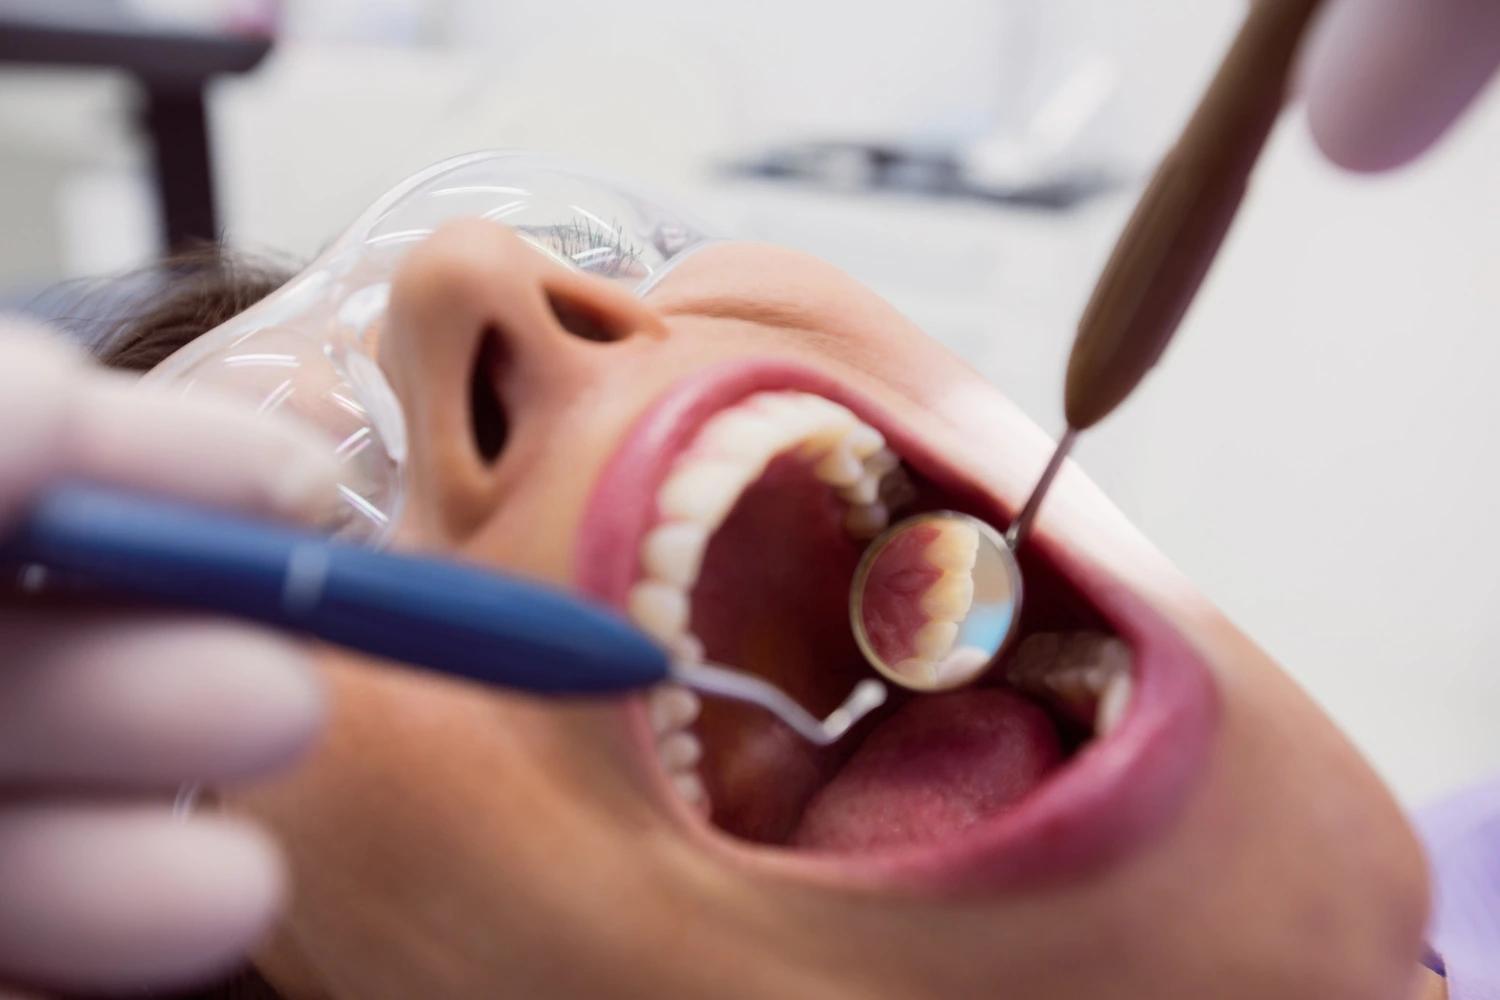 Female patient undergoing Root Canal Treatment procedure at dental clinic.